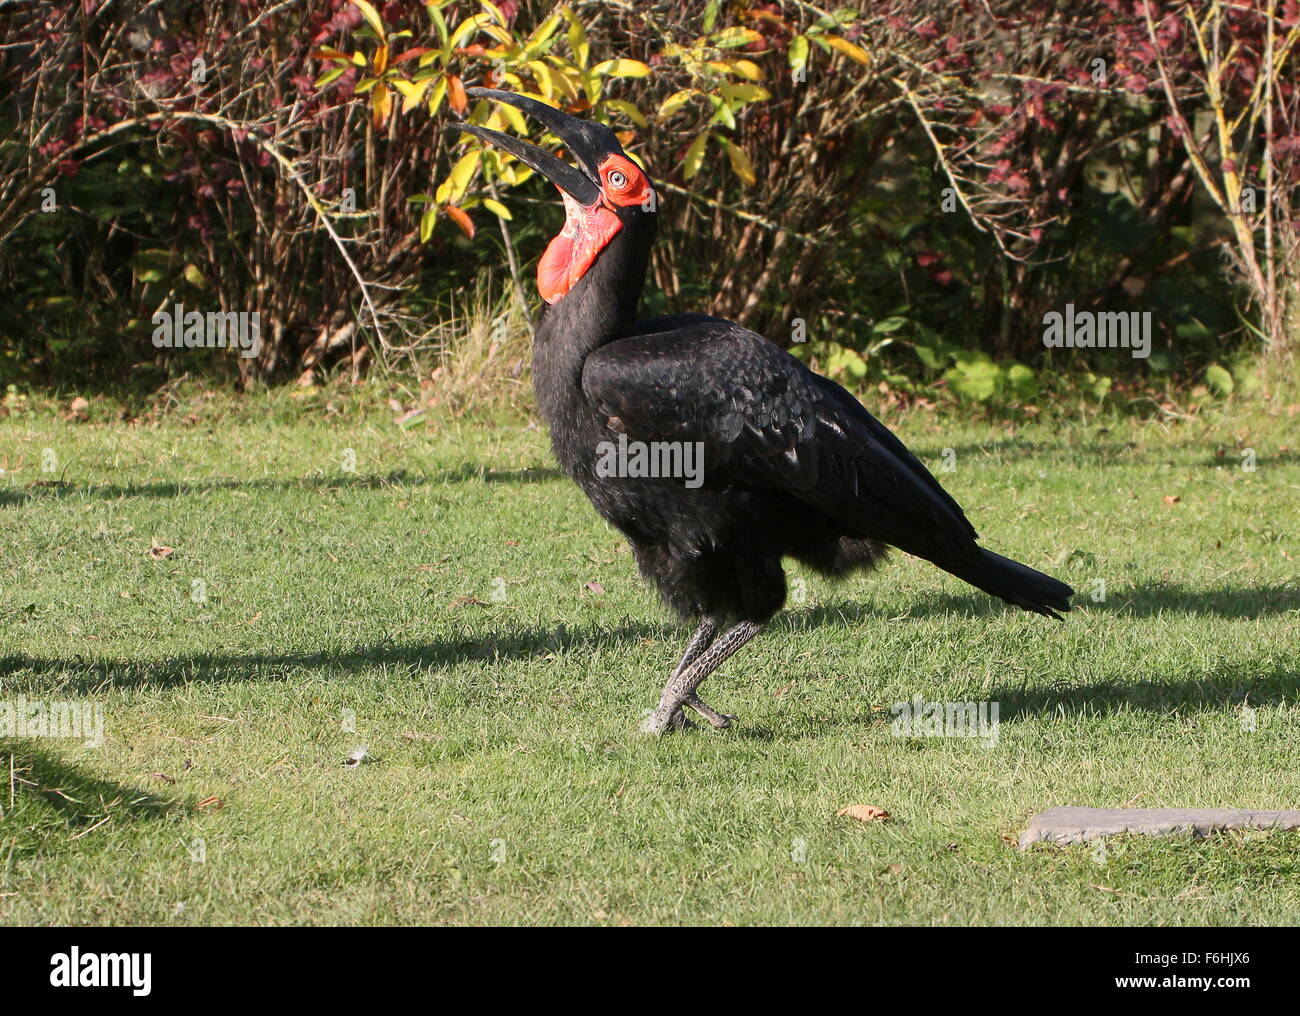 Male African Southern ground Hornbill (Bucorvus Leadbeateri) tossing a grub into the air before swallowing Stock Photo